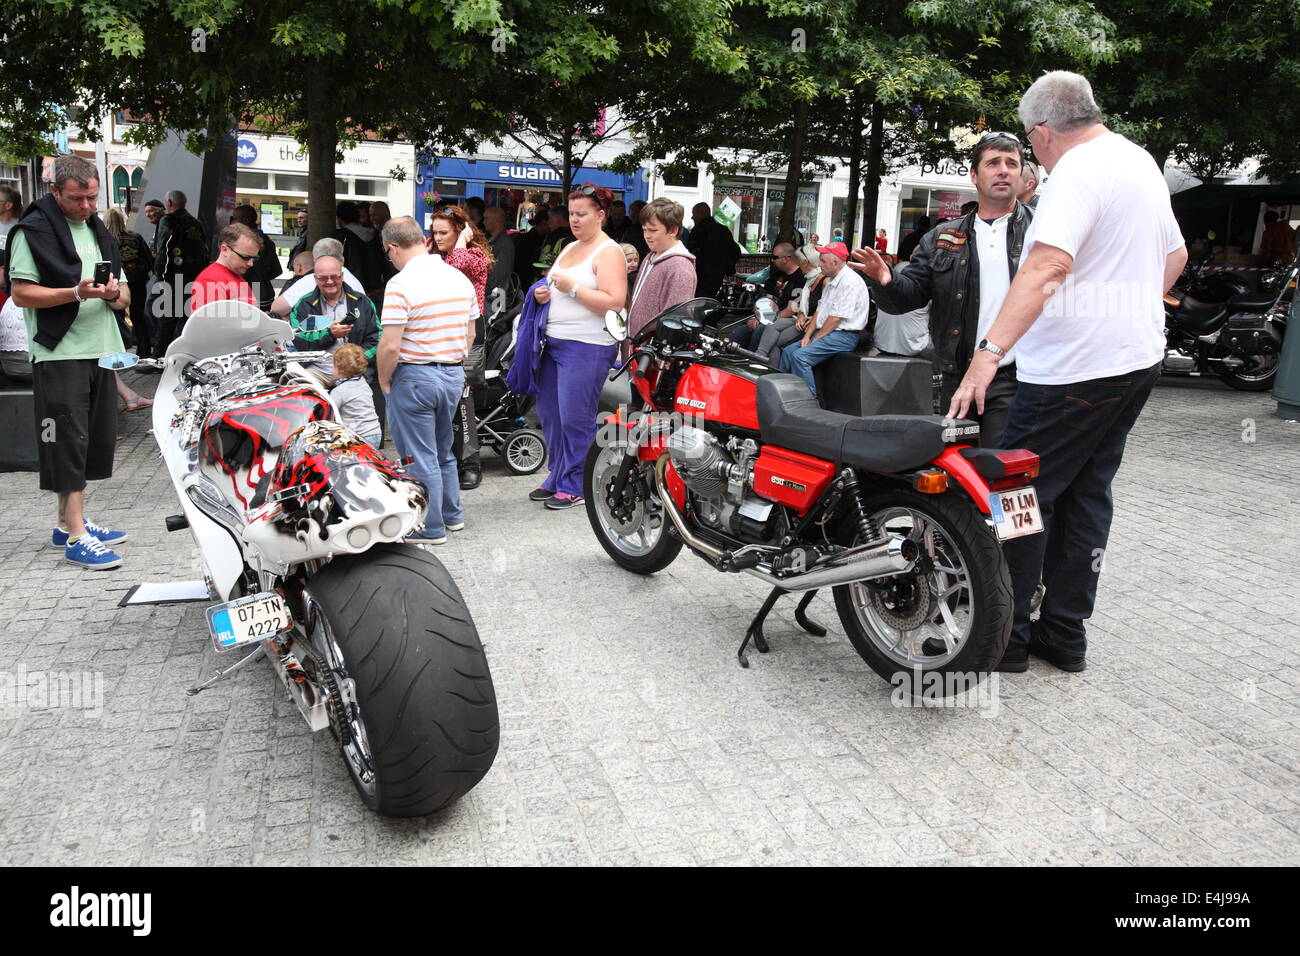 Waterford, Ireland. 13th July, 2014. Waterford Bike fest 2014, The annual bike fest that now attracts hundreds of bike enthusiasts from the UK, Ireland and mainland Europe. Credit:  Ian Shipley/Alamy Live News Stock Photo